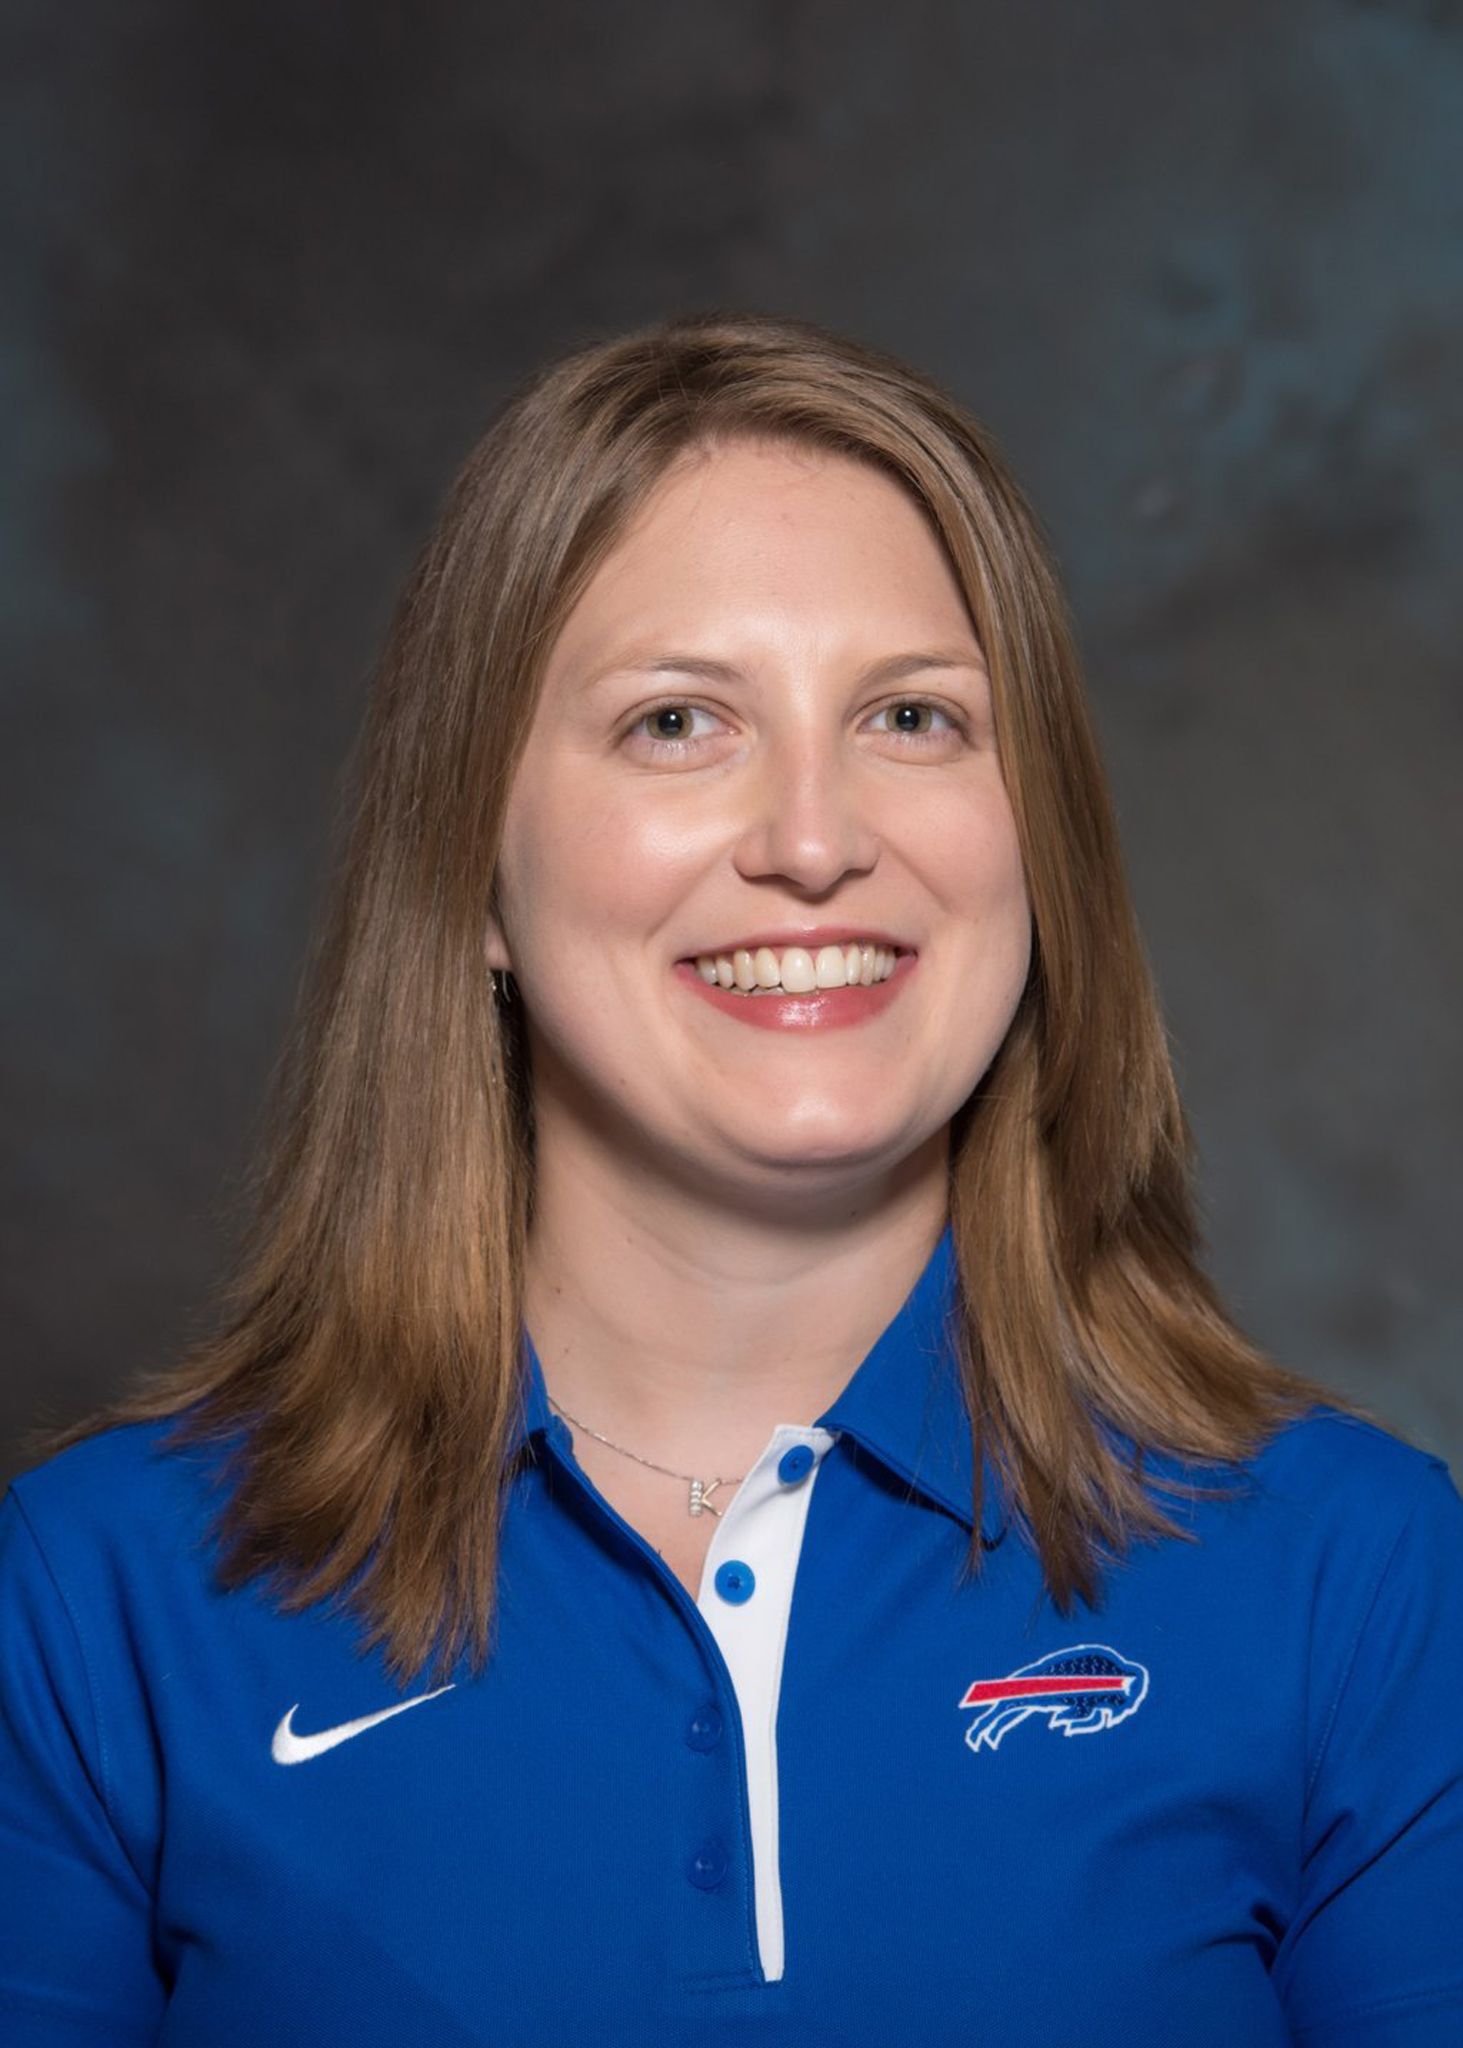 This photo provided by the Buffalo Bills shows Kathryn Smith, who has been announced as the team's new special teams quality control coach on Jan. 20 2016. (Buffalo Bills Handout/EPA)